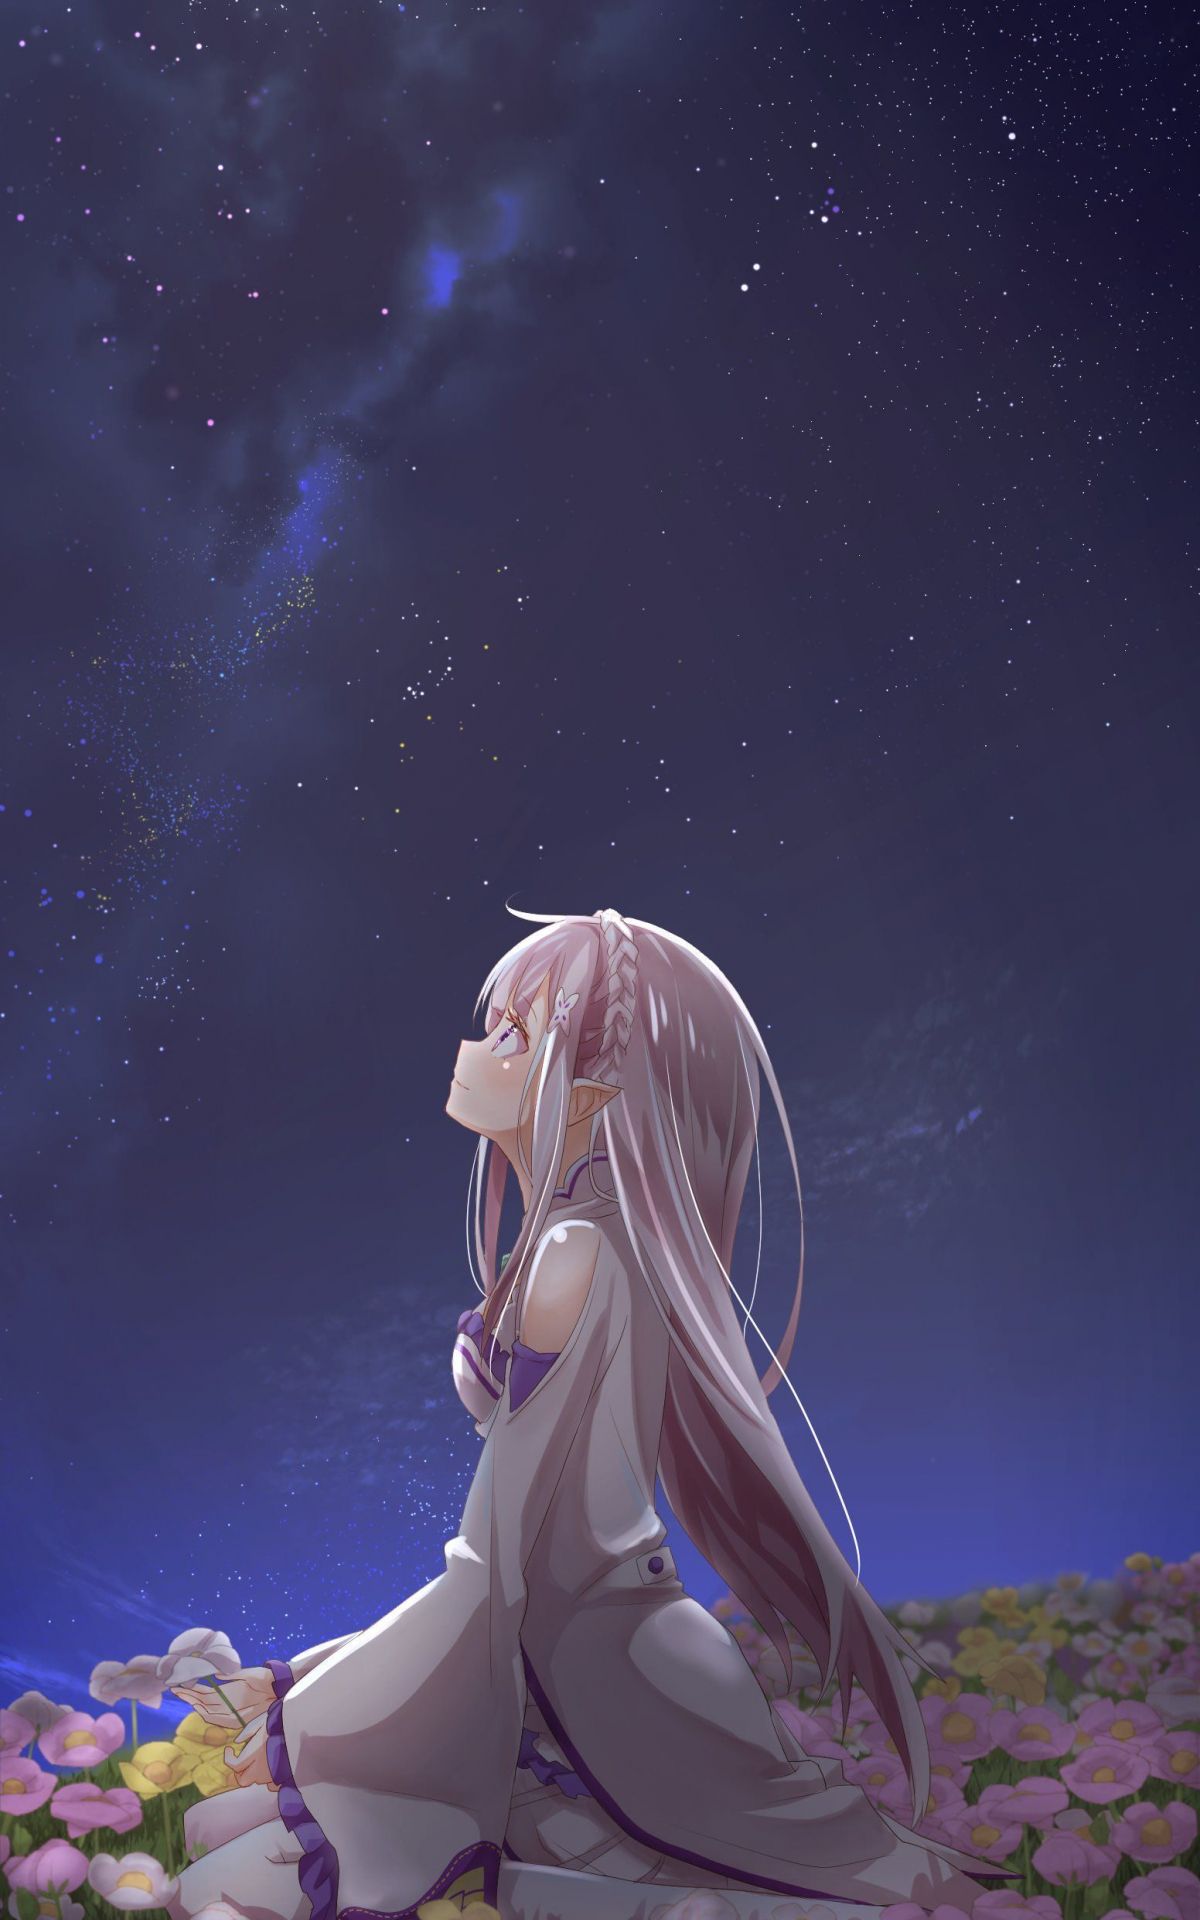 Free download 1552x3007 Anime iPhone Wallpaper HD Wallpaper Phone wallpaper [1552x3007] for your Desktop, Mobile & Tablet. Explore Anime Girl 2019 Wallpaper. Anime Girl 2019 Wallpaper, Anime Girl Wallpaper, Girl Anime Wallpaper